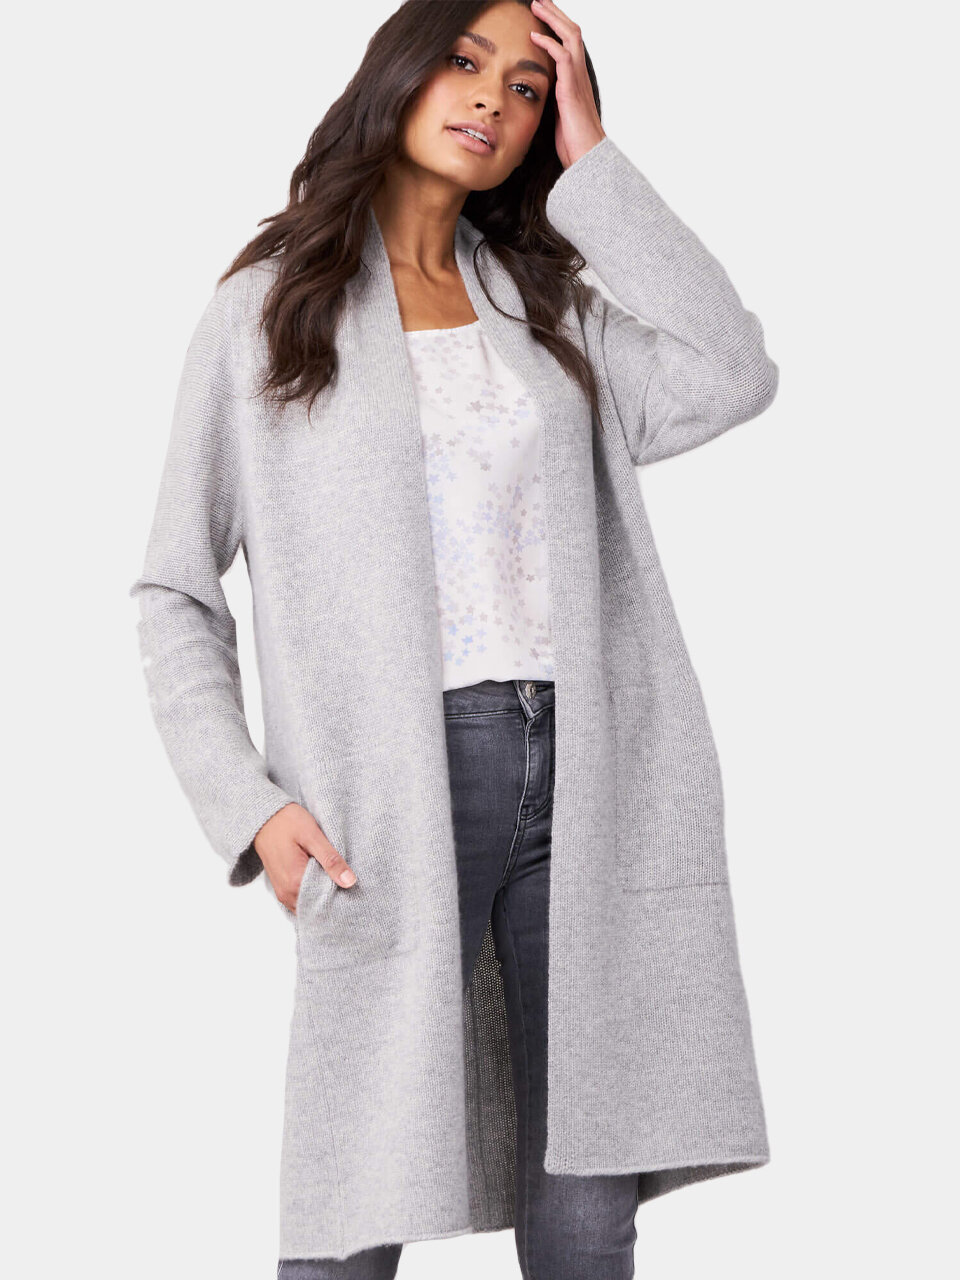 Repeat Cashmere - Luxurious Chunky Knit Cashmere Cardigan